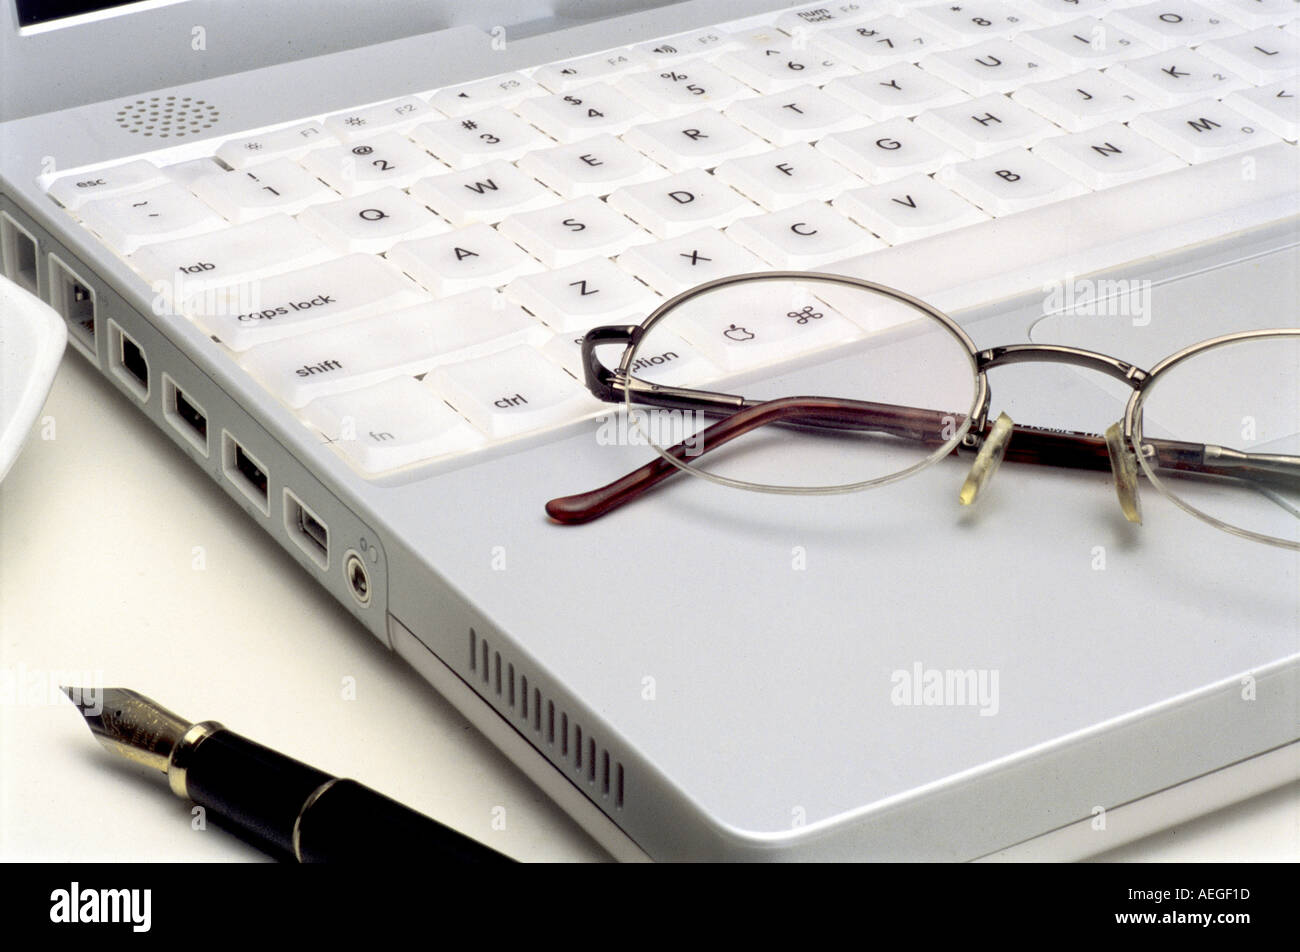 Office laptop detail fountain pen glasses spectacles keyboard keys technology computer business concept Stock Photo